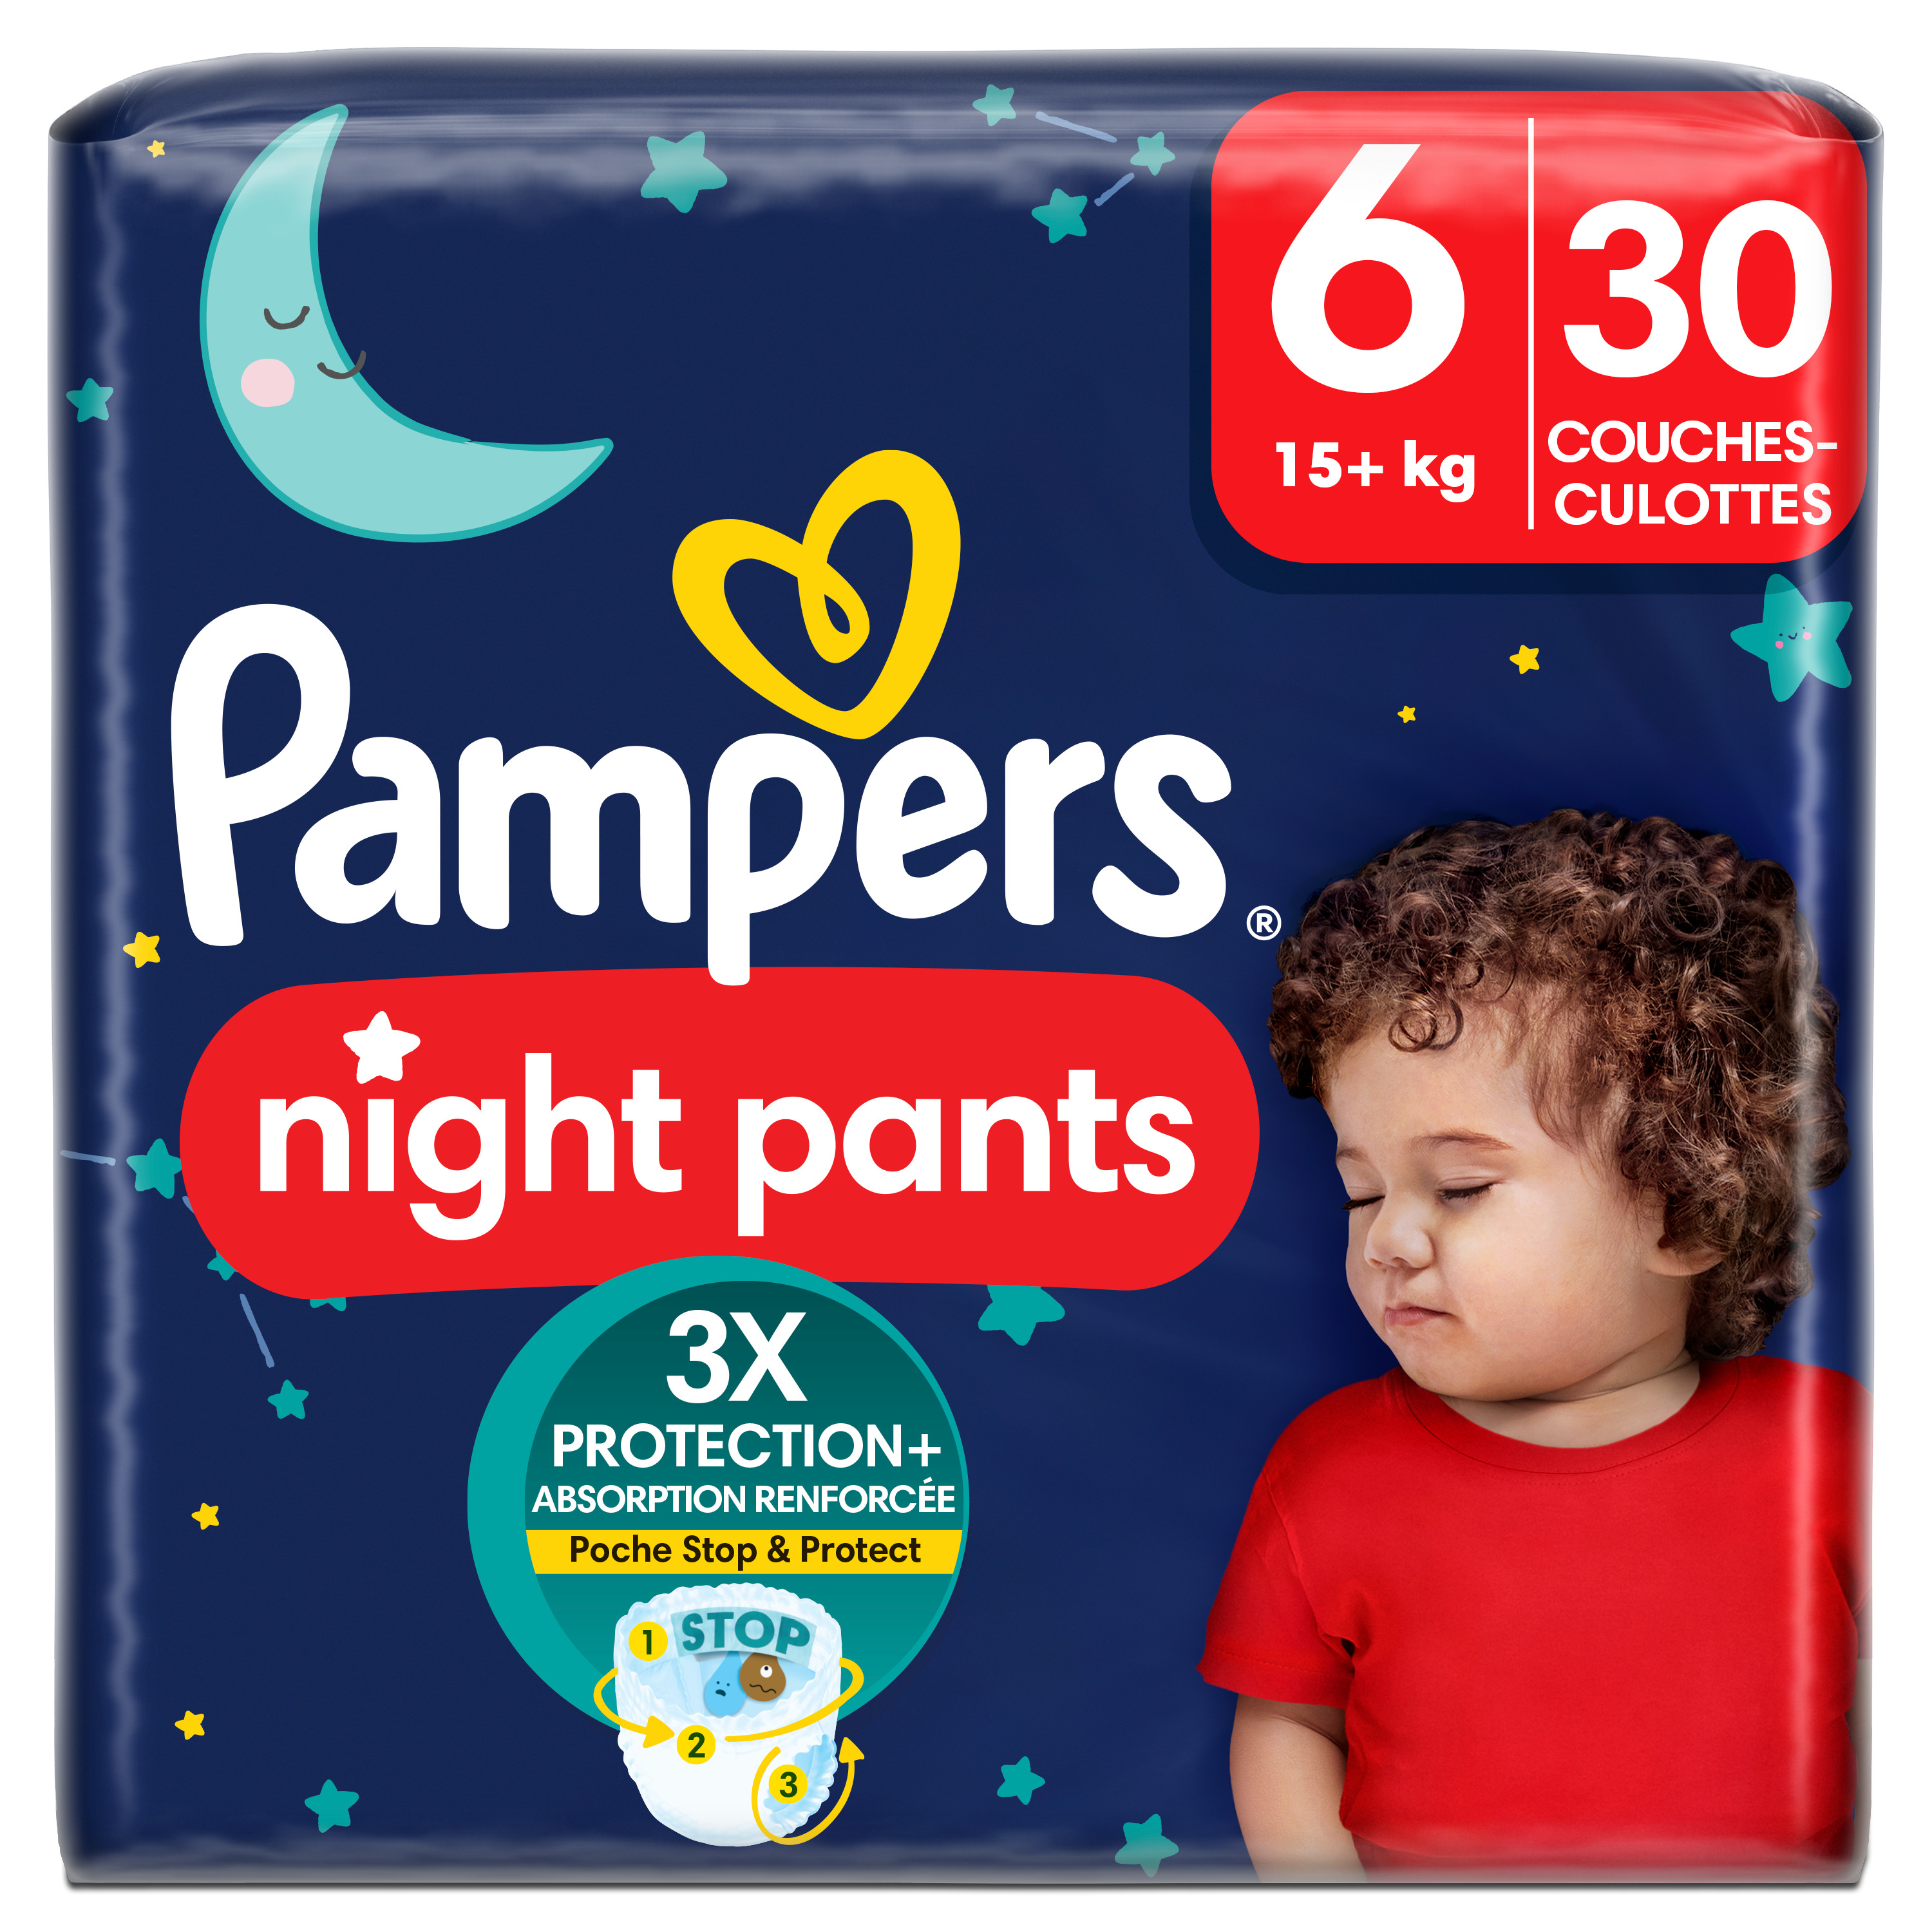 Couches-Culottes Baby-Dry Night Pants Pour La Nuit Taille 6 15kg+ PAMPERS